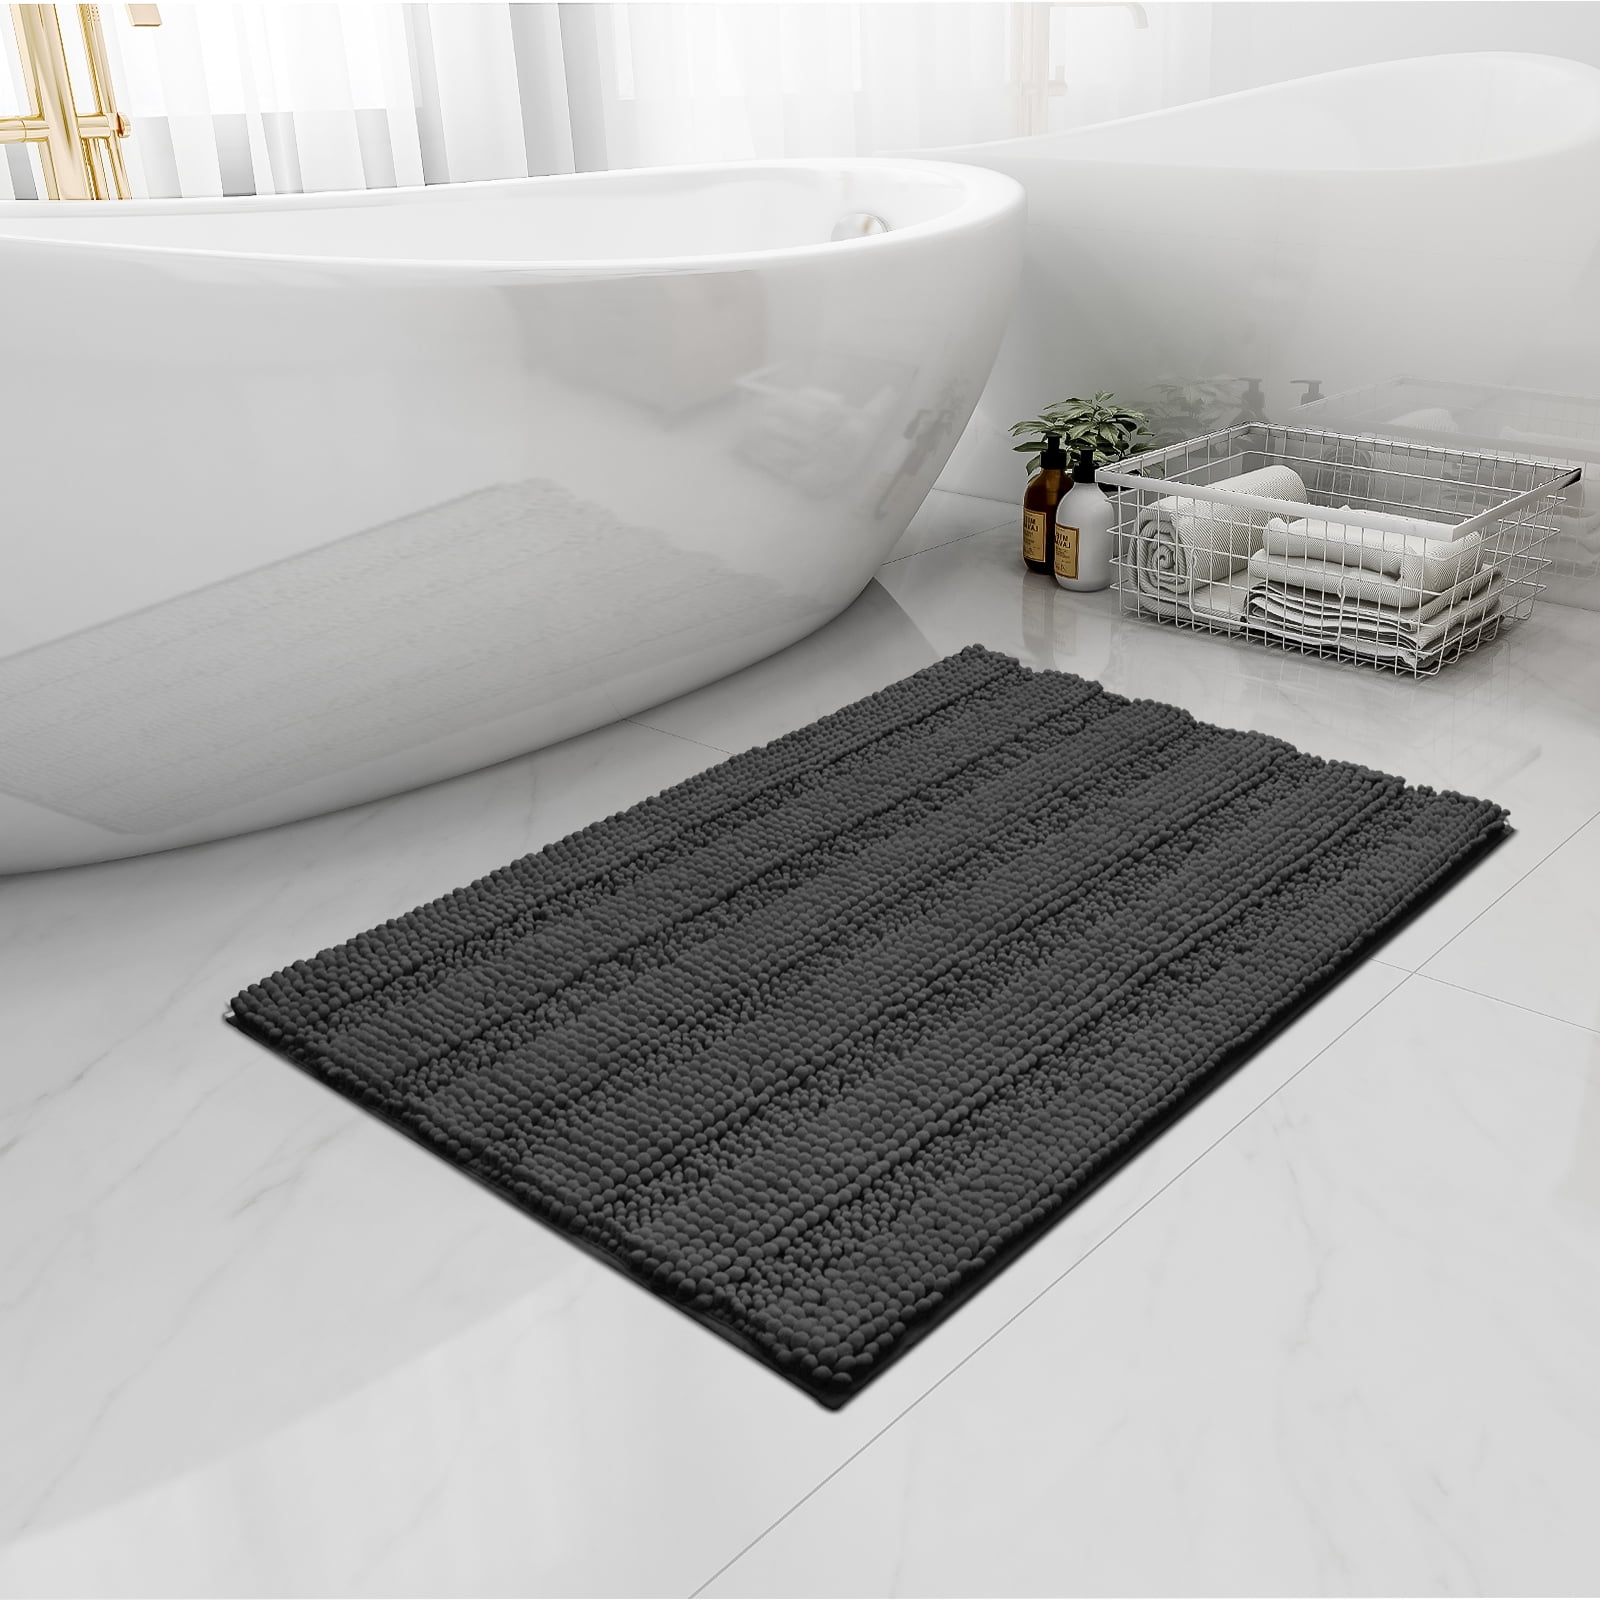 Details about   Hand Woven 100% Cotton Damask Bath Rug Floor mat for Spa Vanity Shower Machine W 